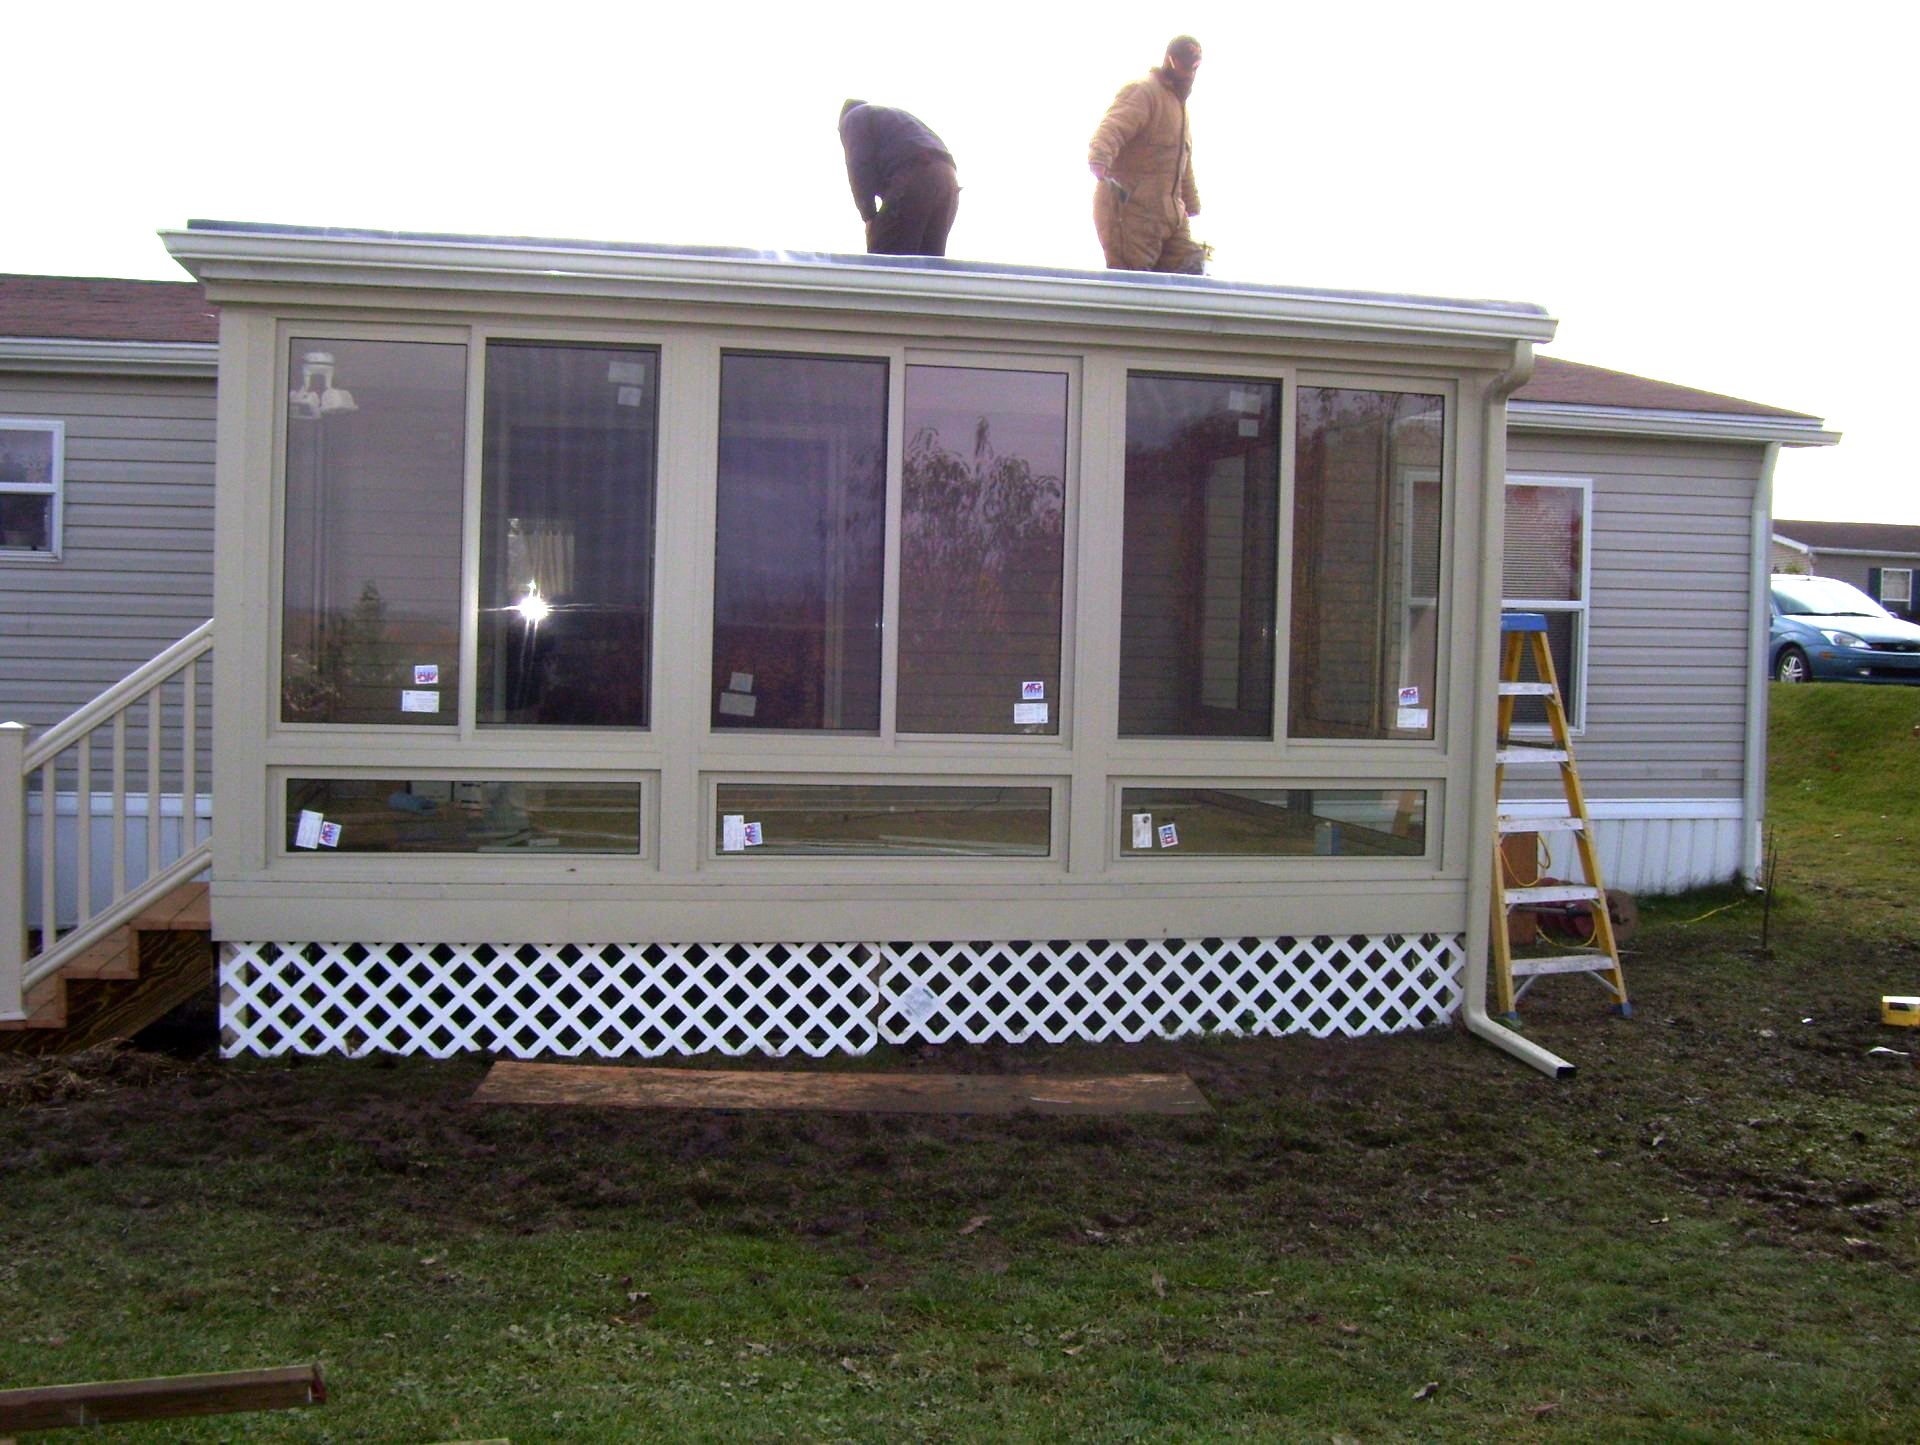 A man is standing on the roof of a screened in porch